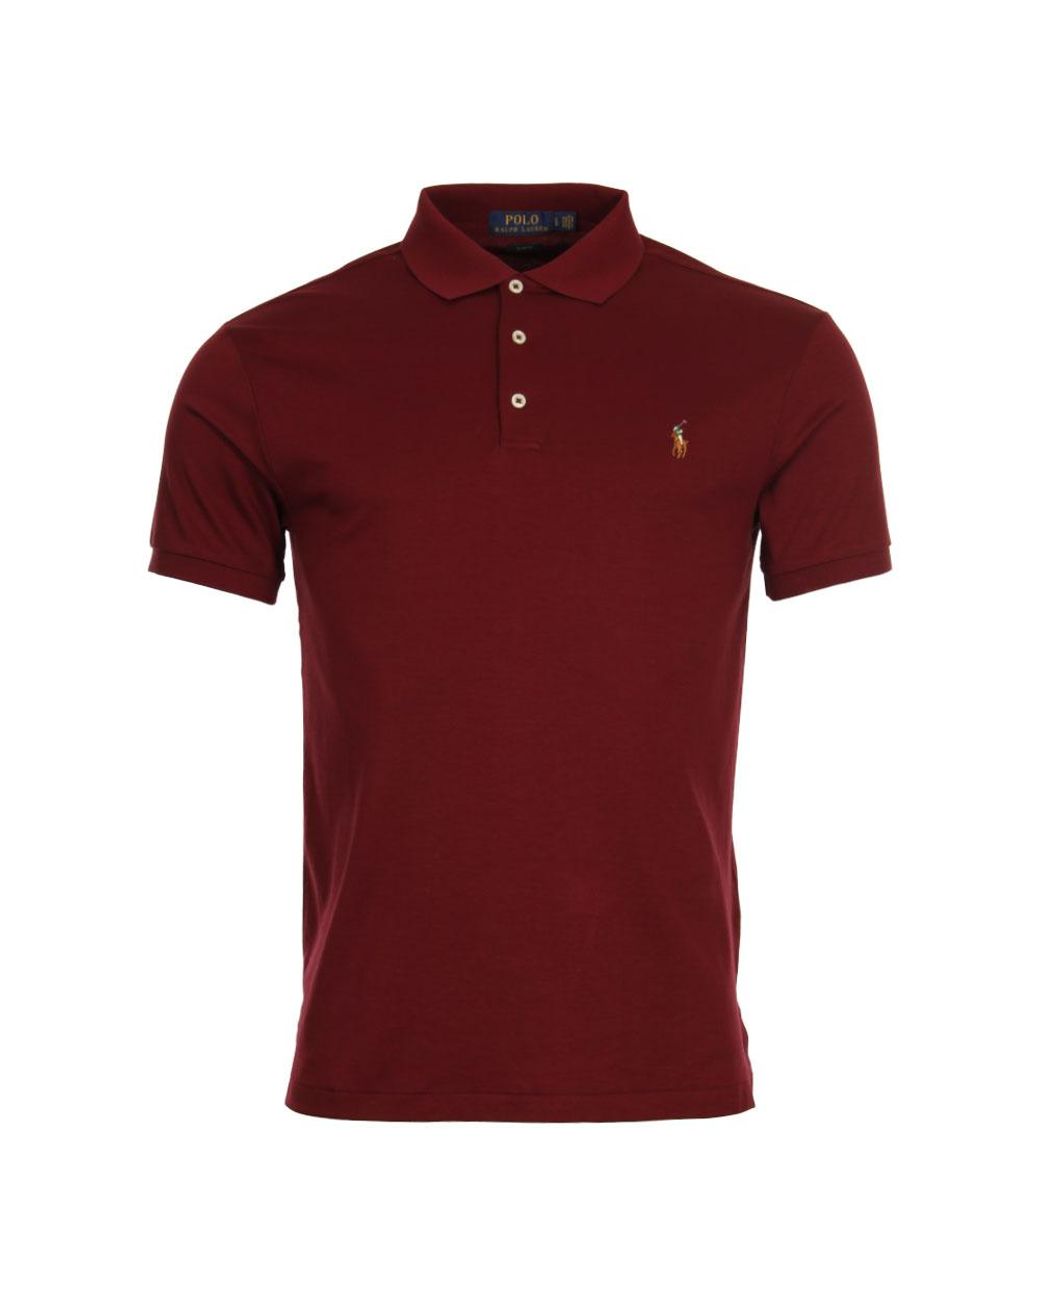 Ralph Lauren Pima Polo Shirt, Slim Fit Wine Red Polo for Men | Lyst